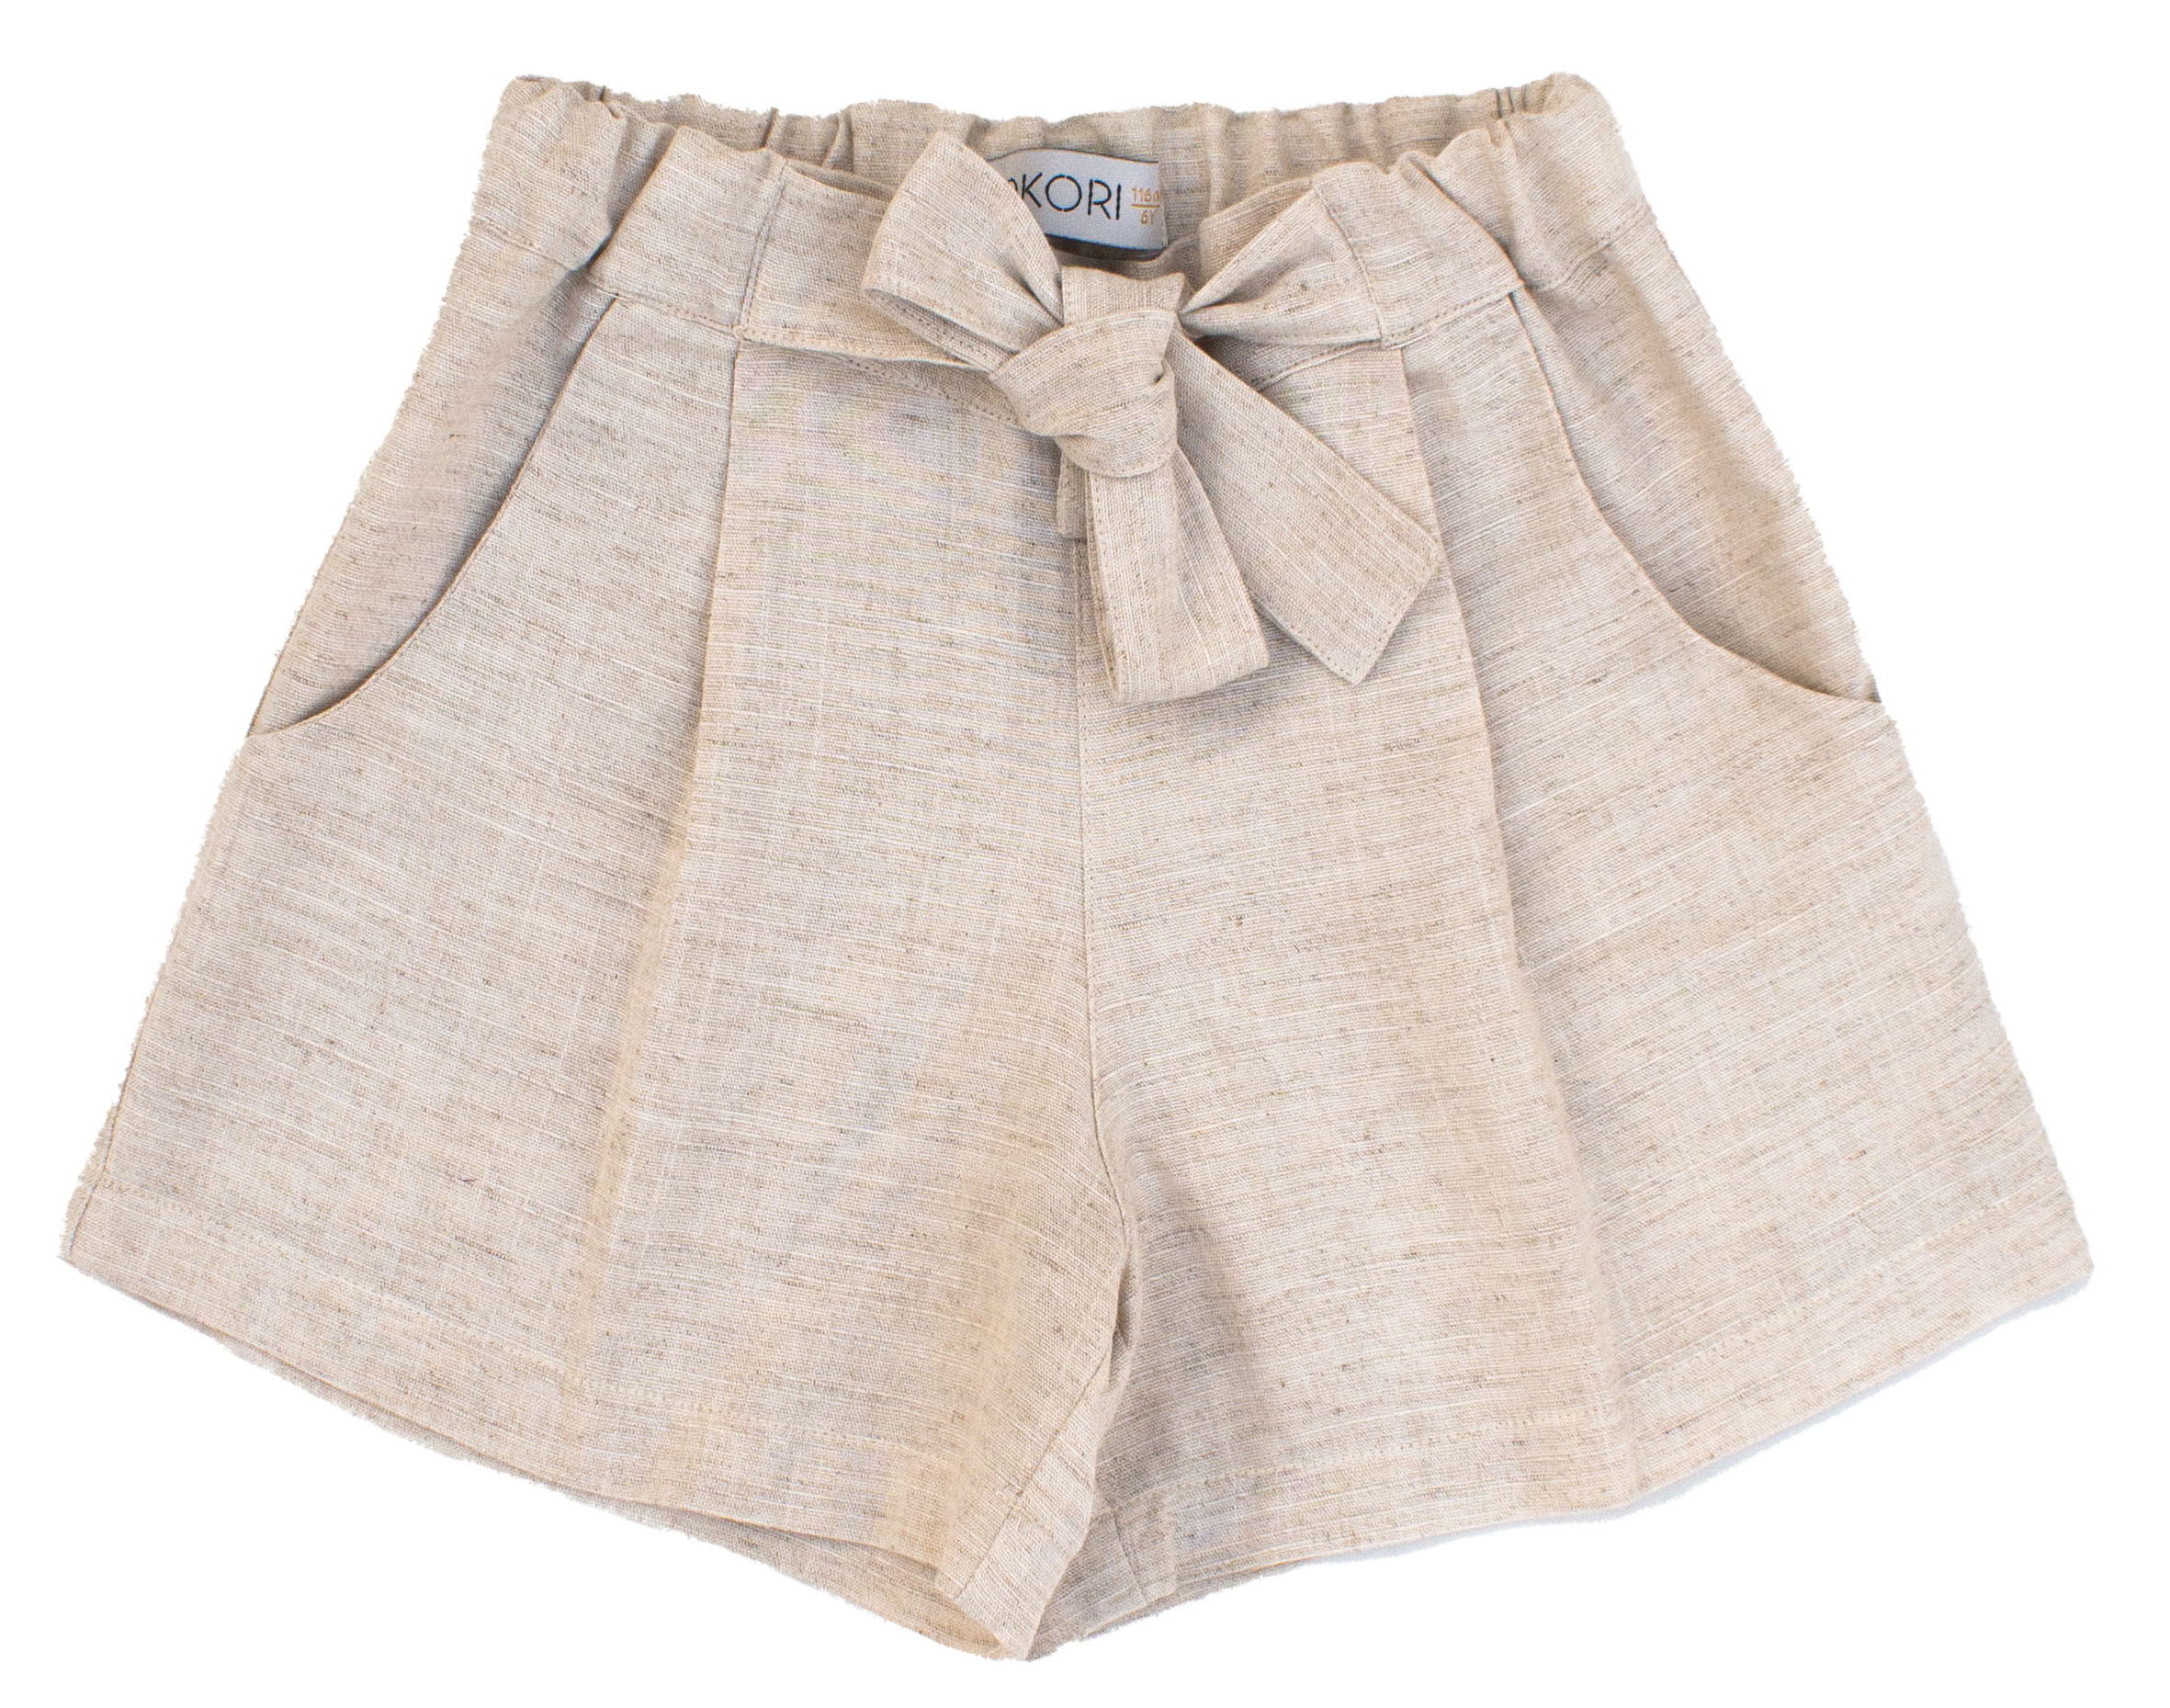                                                                                                                                                           Indie Stone Shorts 